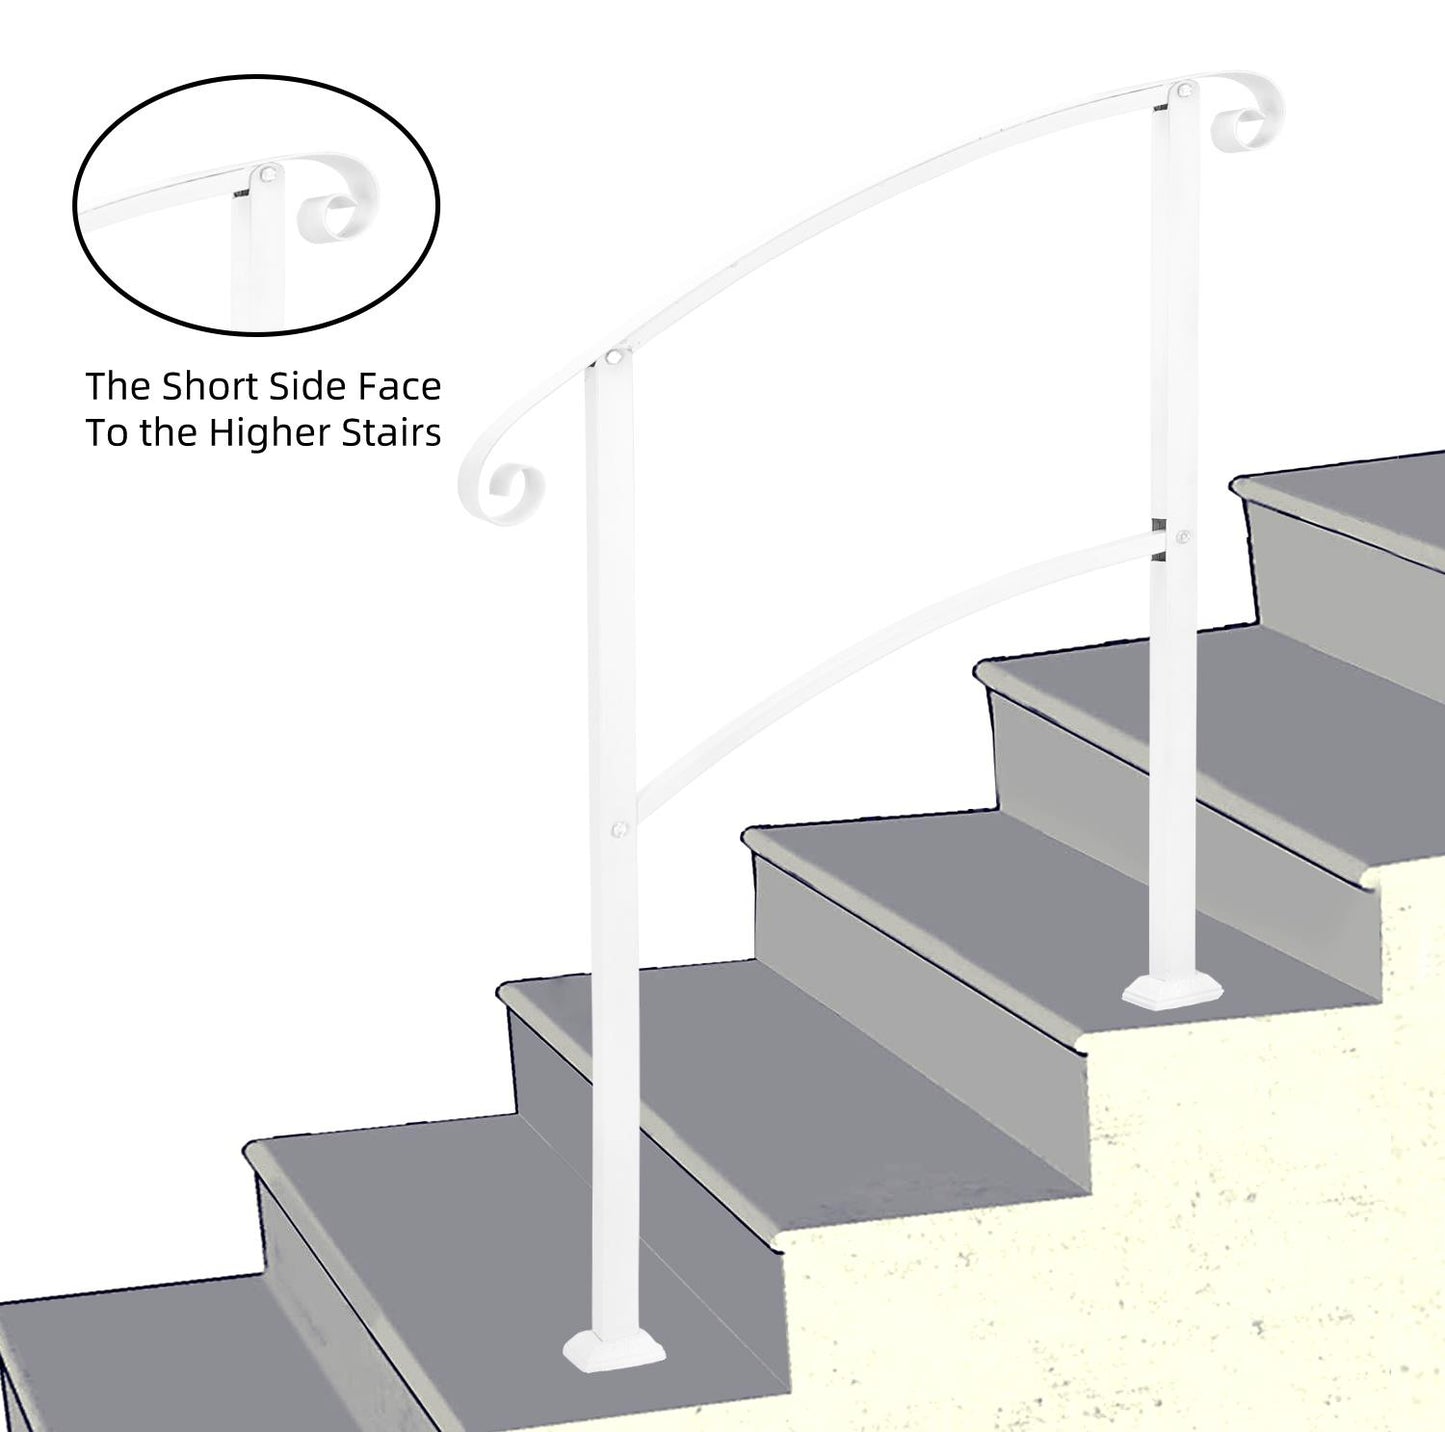 3-1 Steps White Outdoor Stair Railings : Enhance Safety and Style with Premium Top-notch Wrought Iron Hand Rail